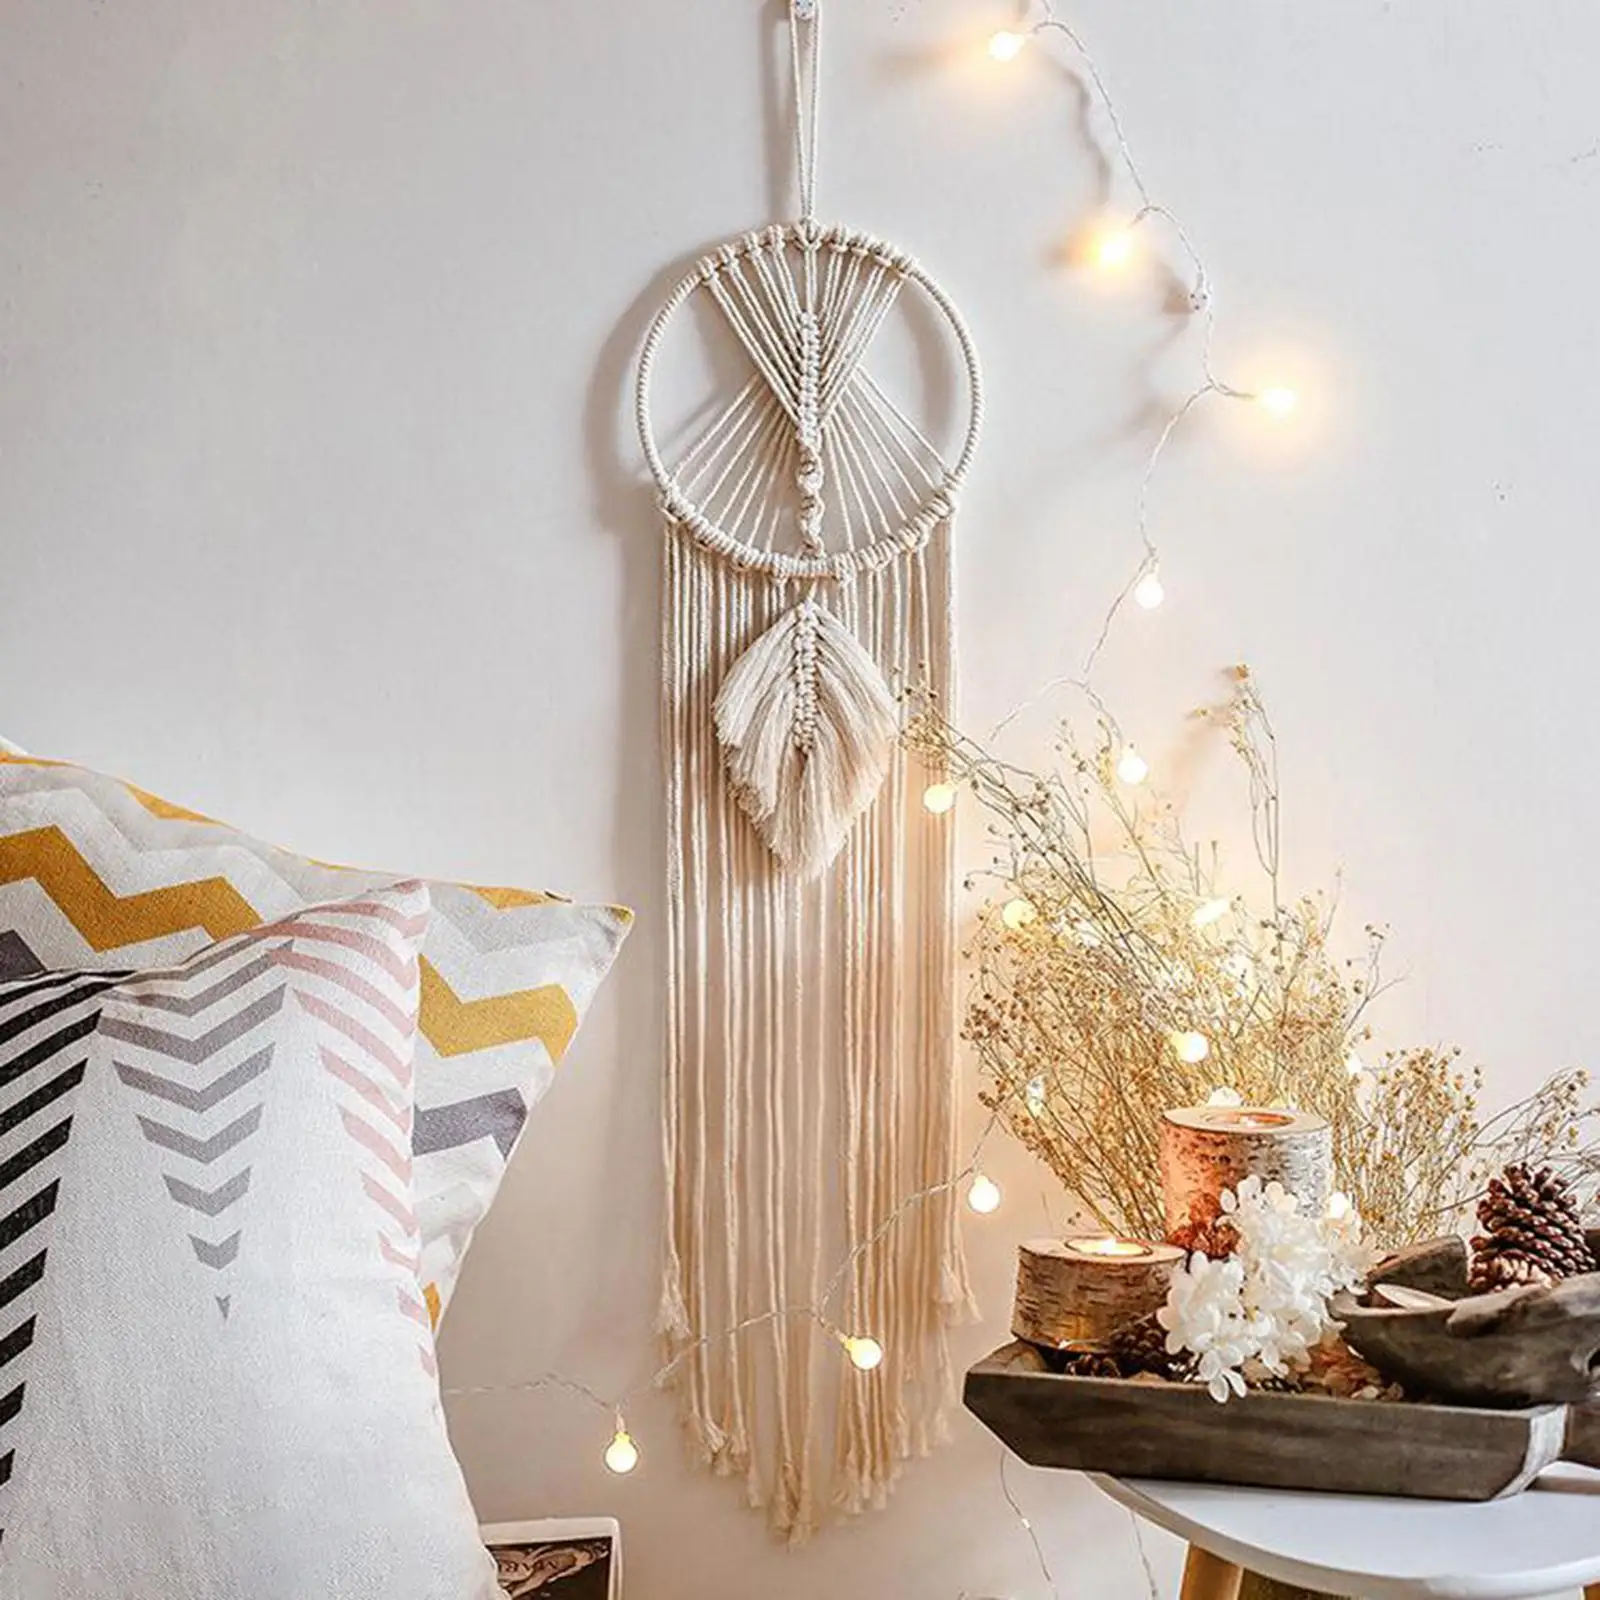 Weave Dream Catcher with Circle Boho Dreamcatcher Cotton Wall Hanging Ornament